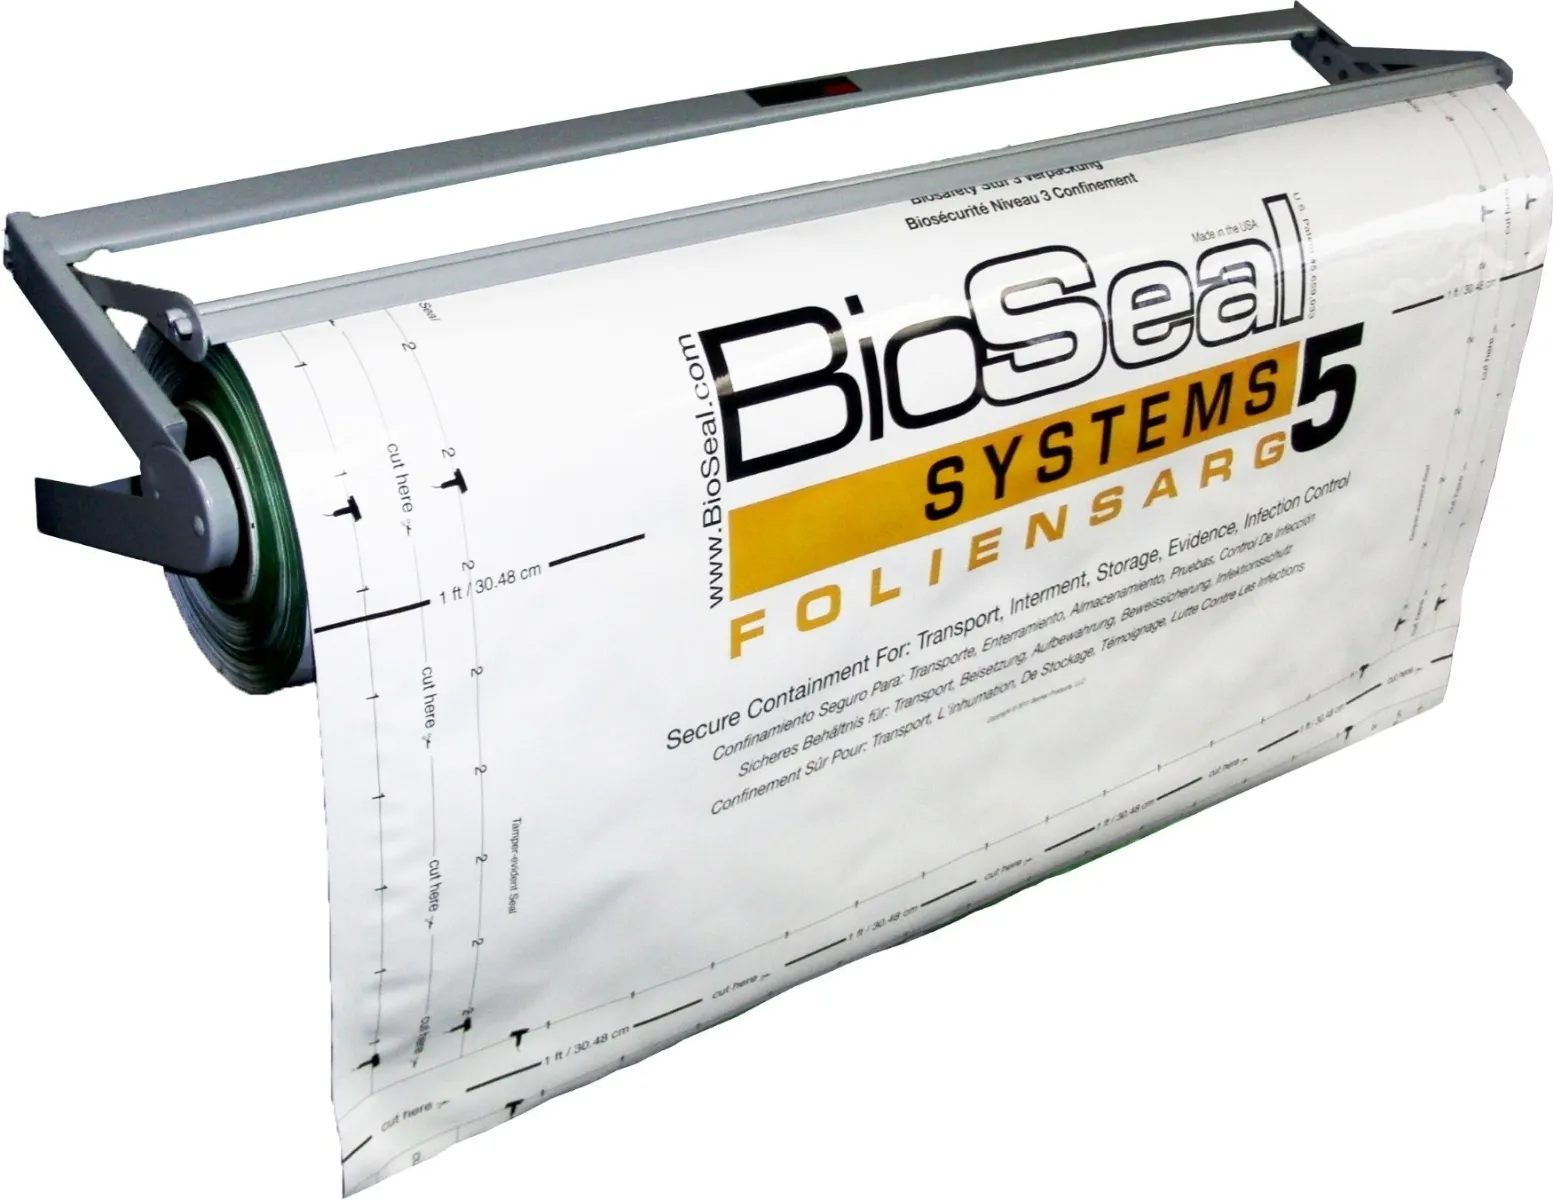 BioSeal - From: BBWMR To: BBWMS - Wall Mount System